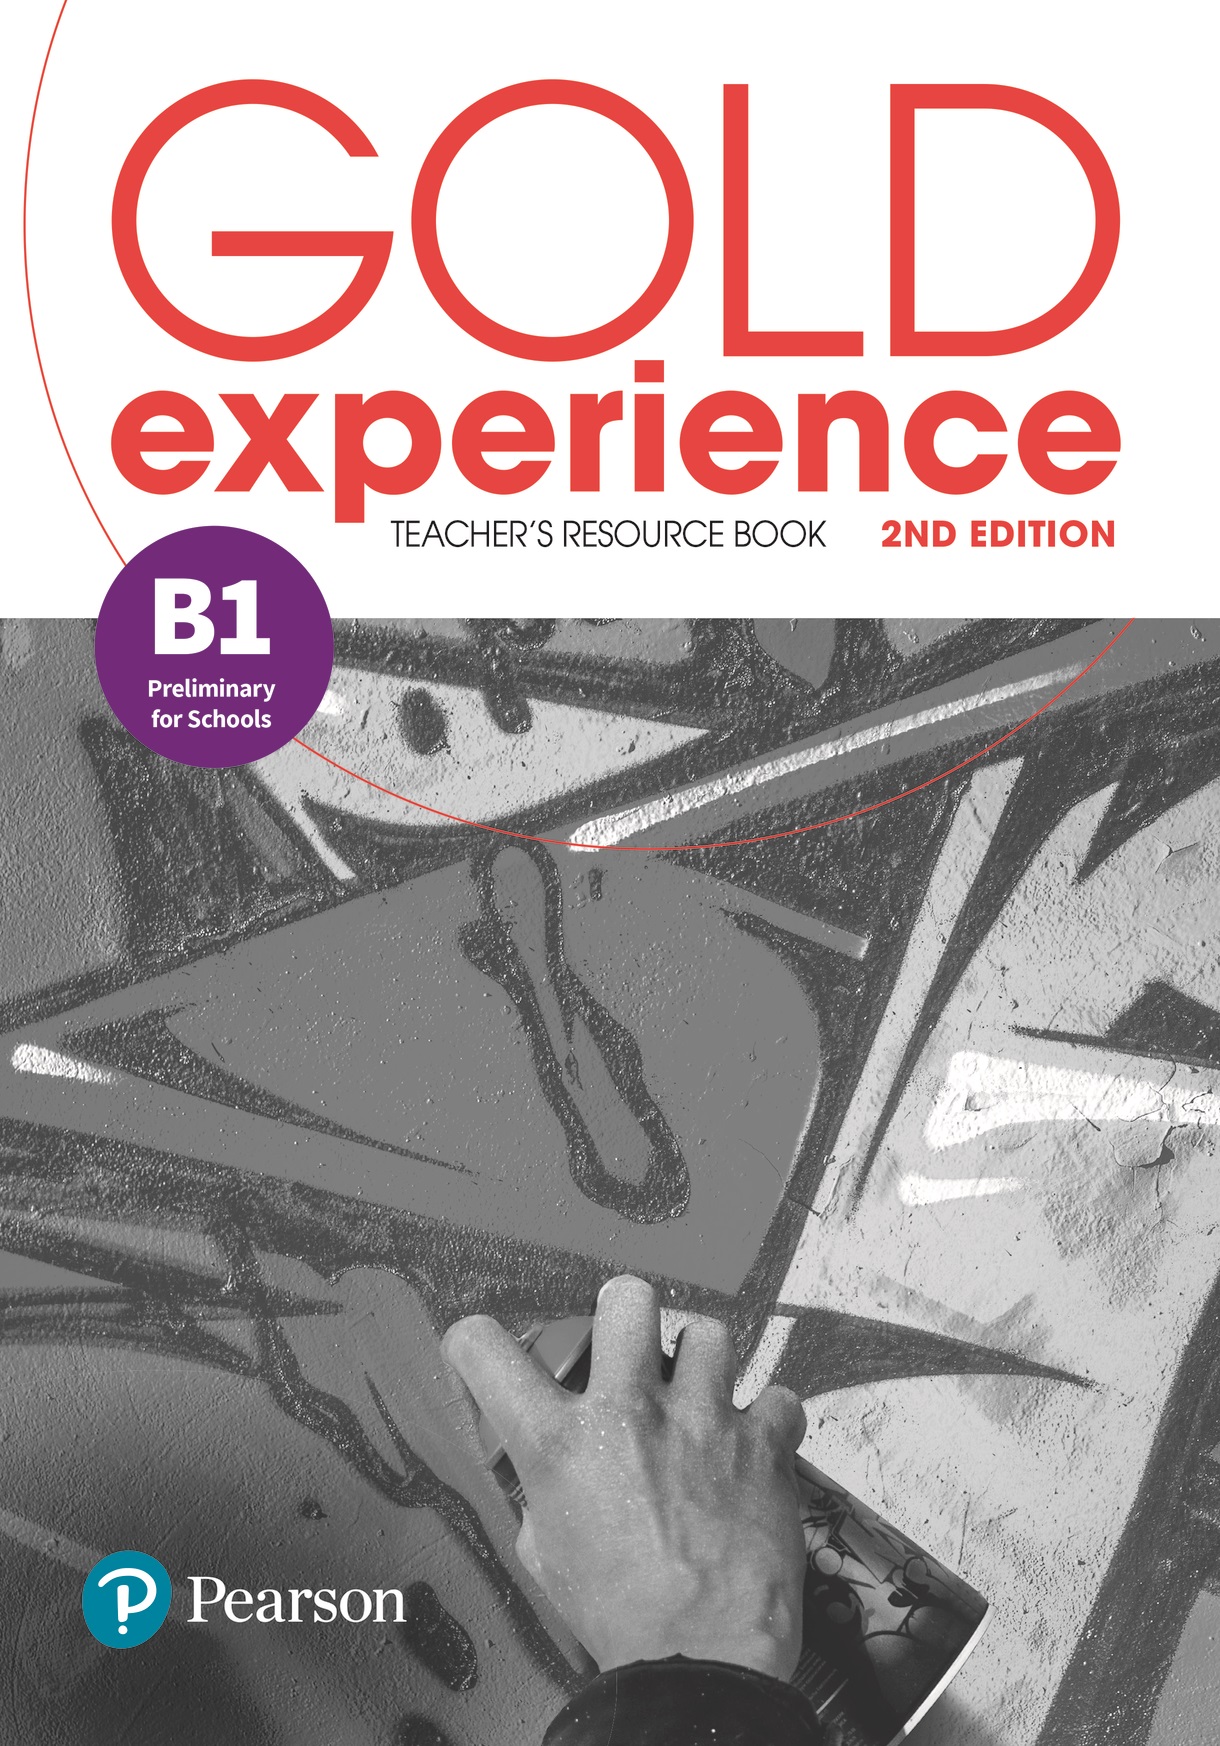 GOLD EXPERIENCE 2ND EDITION B1 Teacher's Resource Book